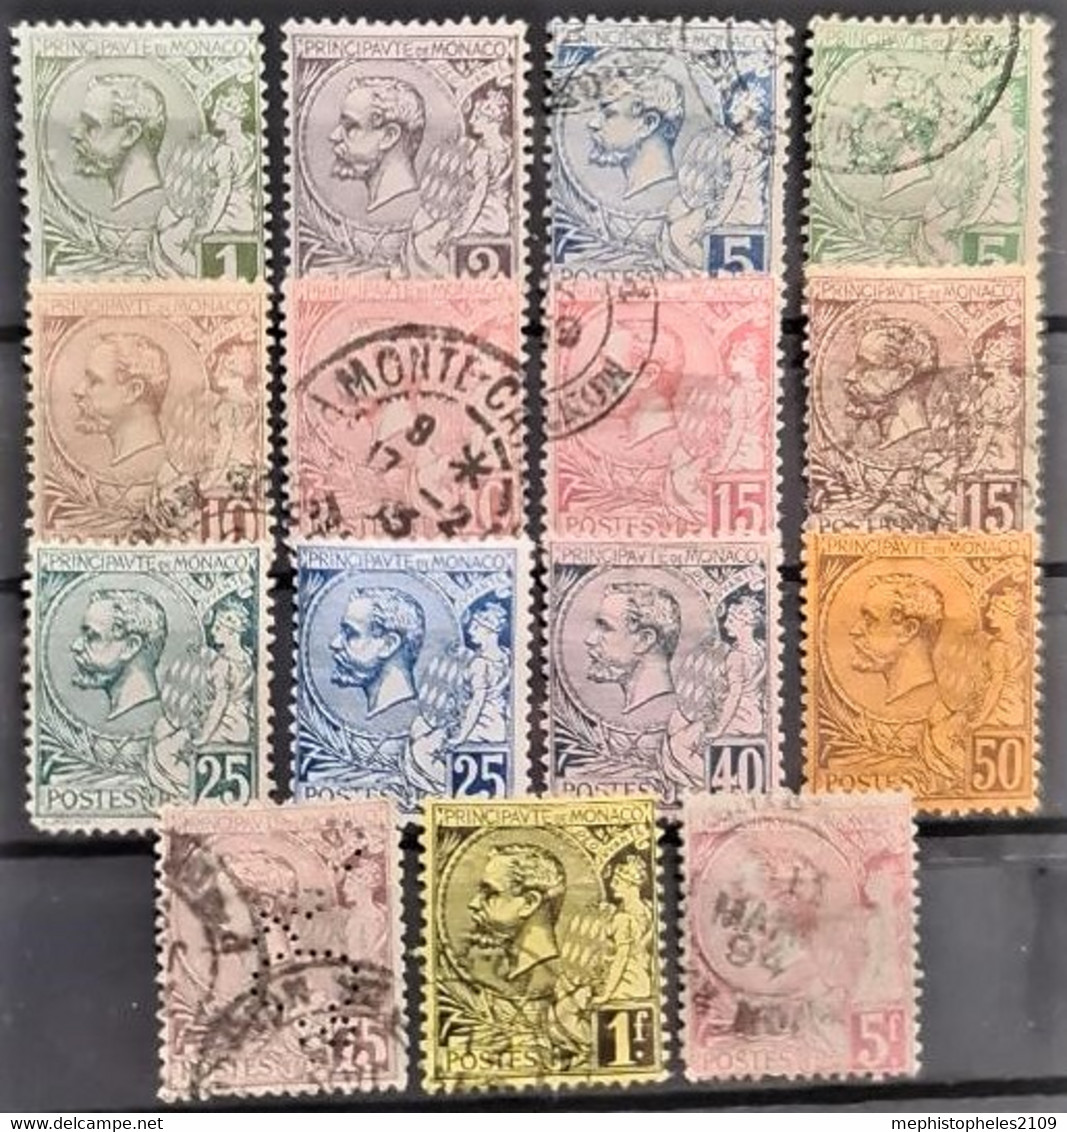 MONACO 1891-1921 - Canceled/MLH - Sc# 11-18, 20-24, 26, 27 - Used Stamps